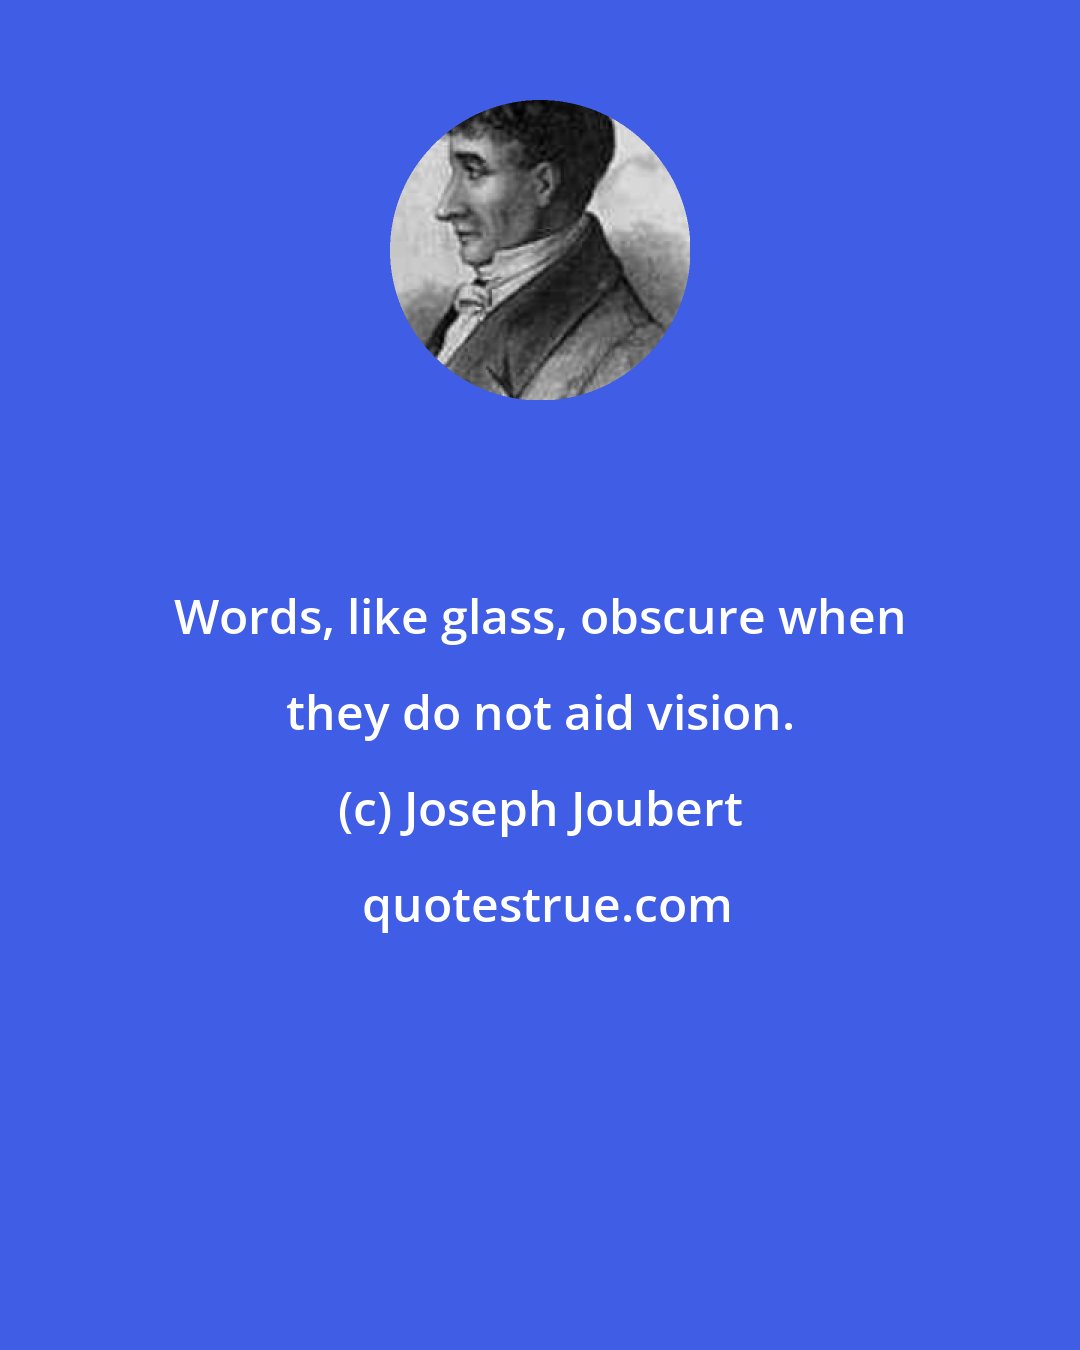 Joseph Joubert: Words, like glass, obscure when they do not aid vision.